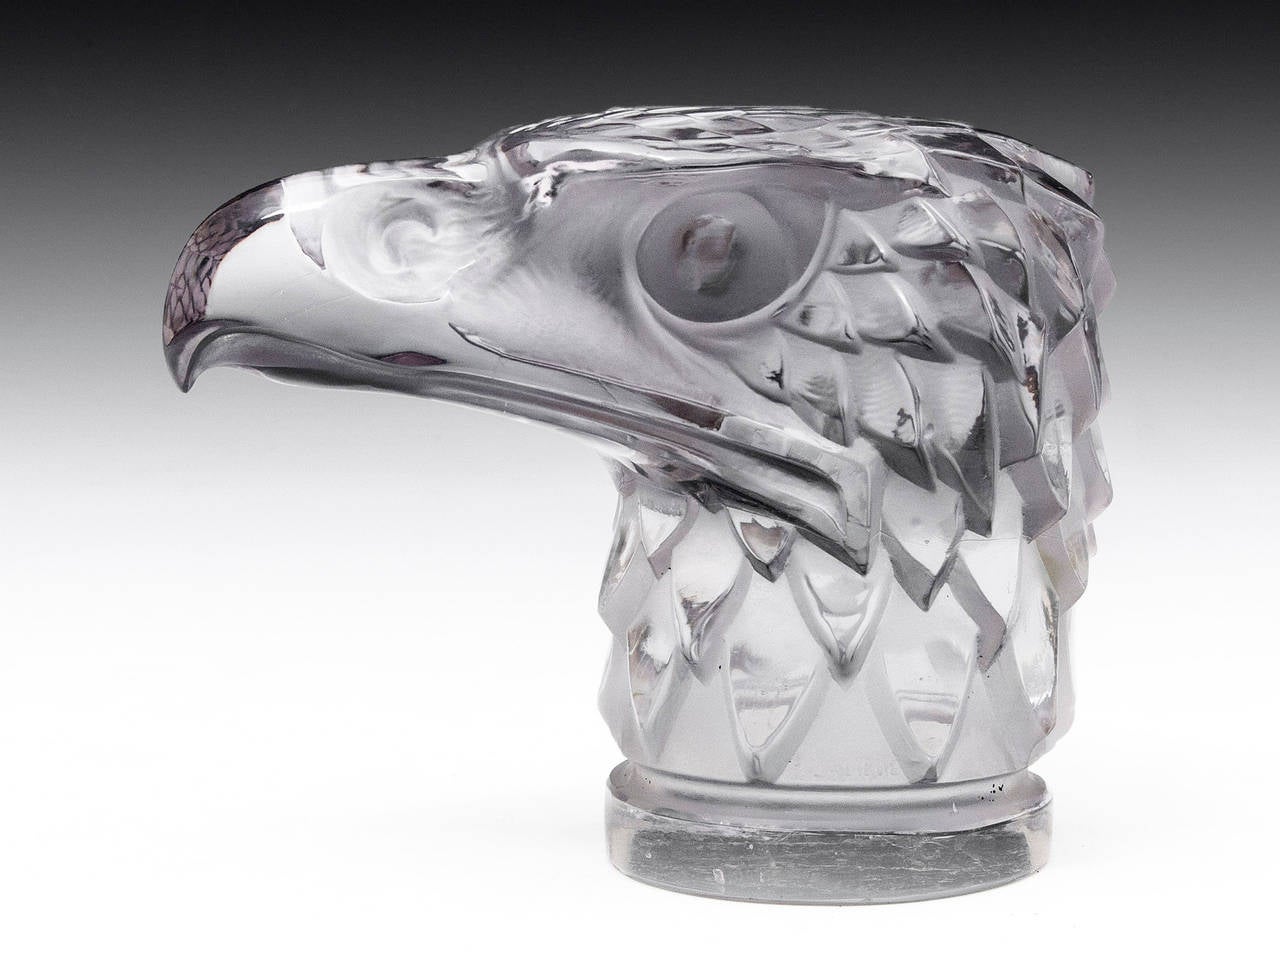 Lalique car mascot in the shape of an eagle head. These were originally made as car hood ornaments in the 1920's by famous glass make René Jules Lalique, who started a company using his own name, which still creates fine glassware today. This eagle